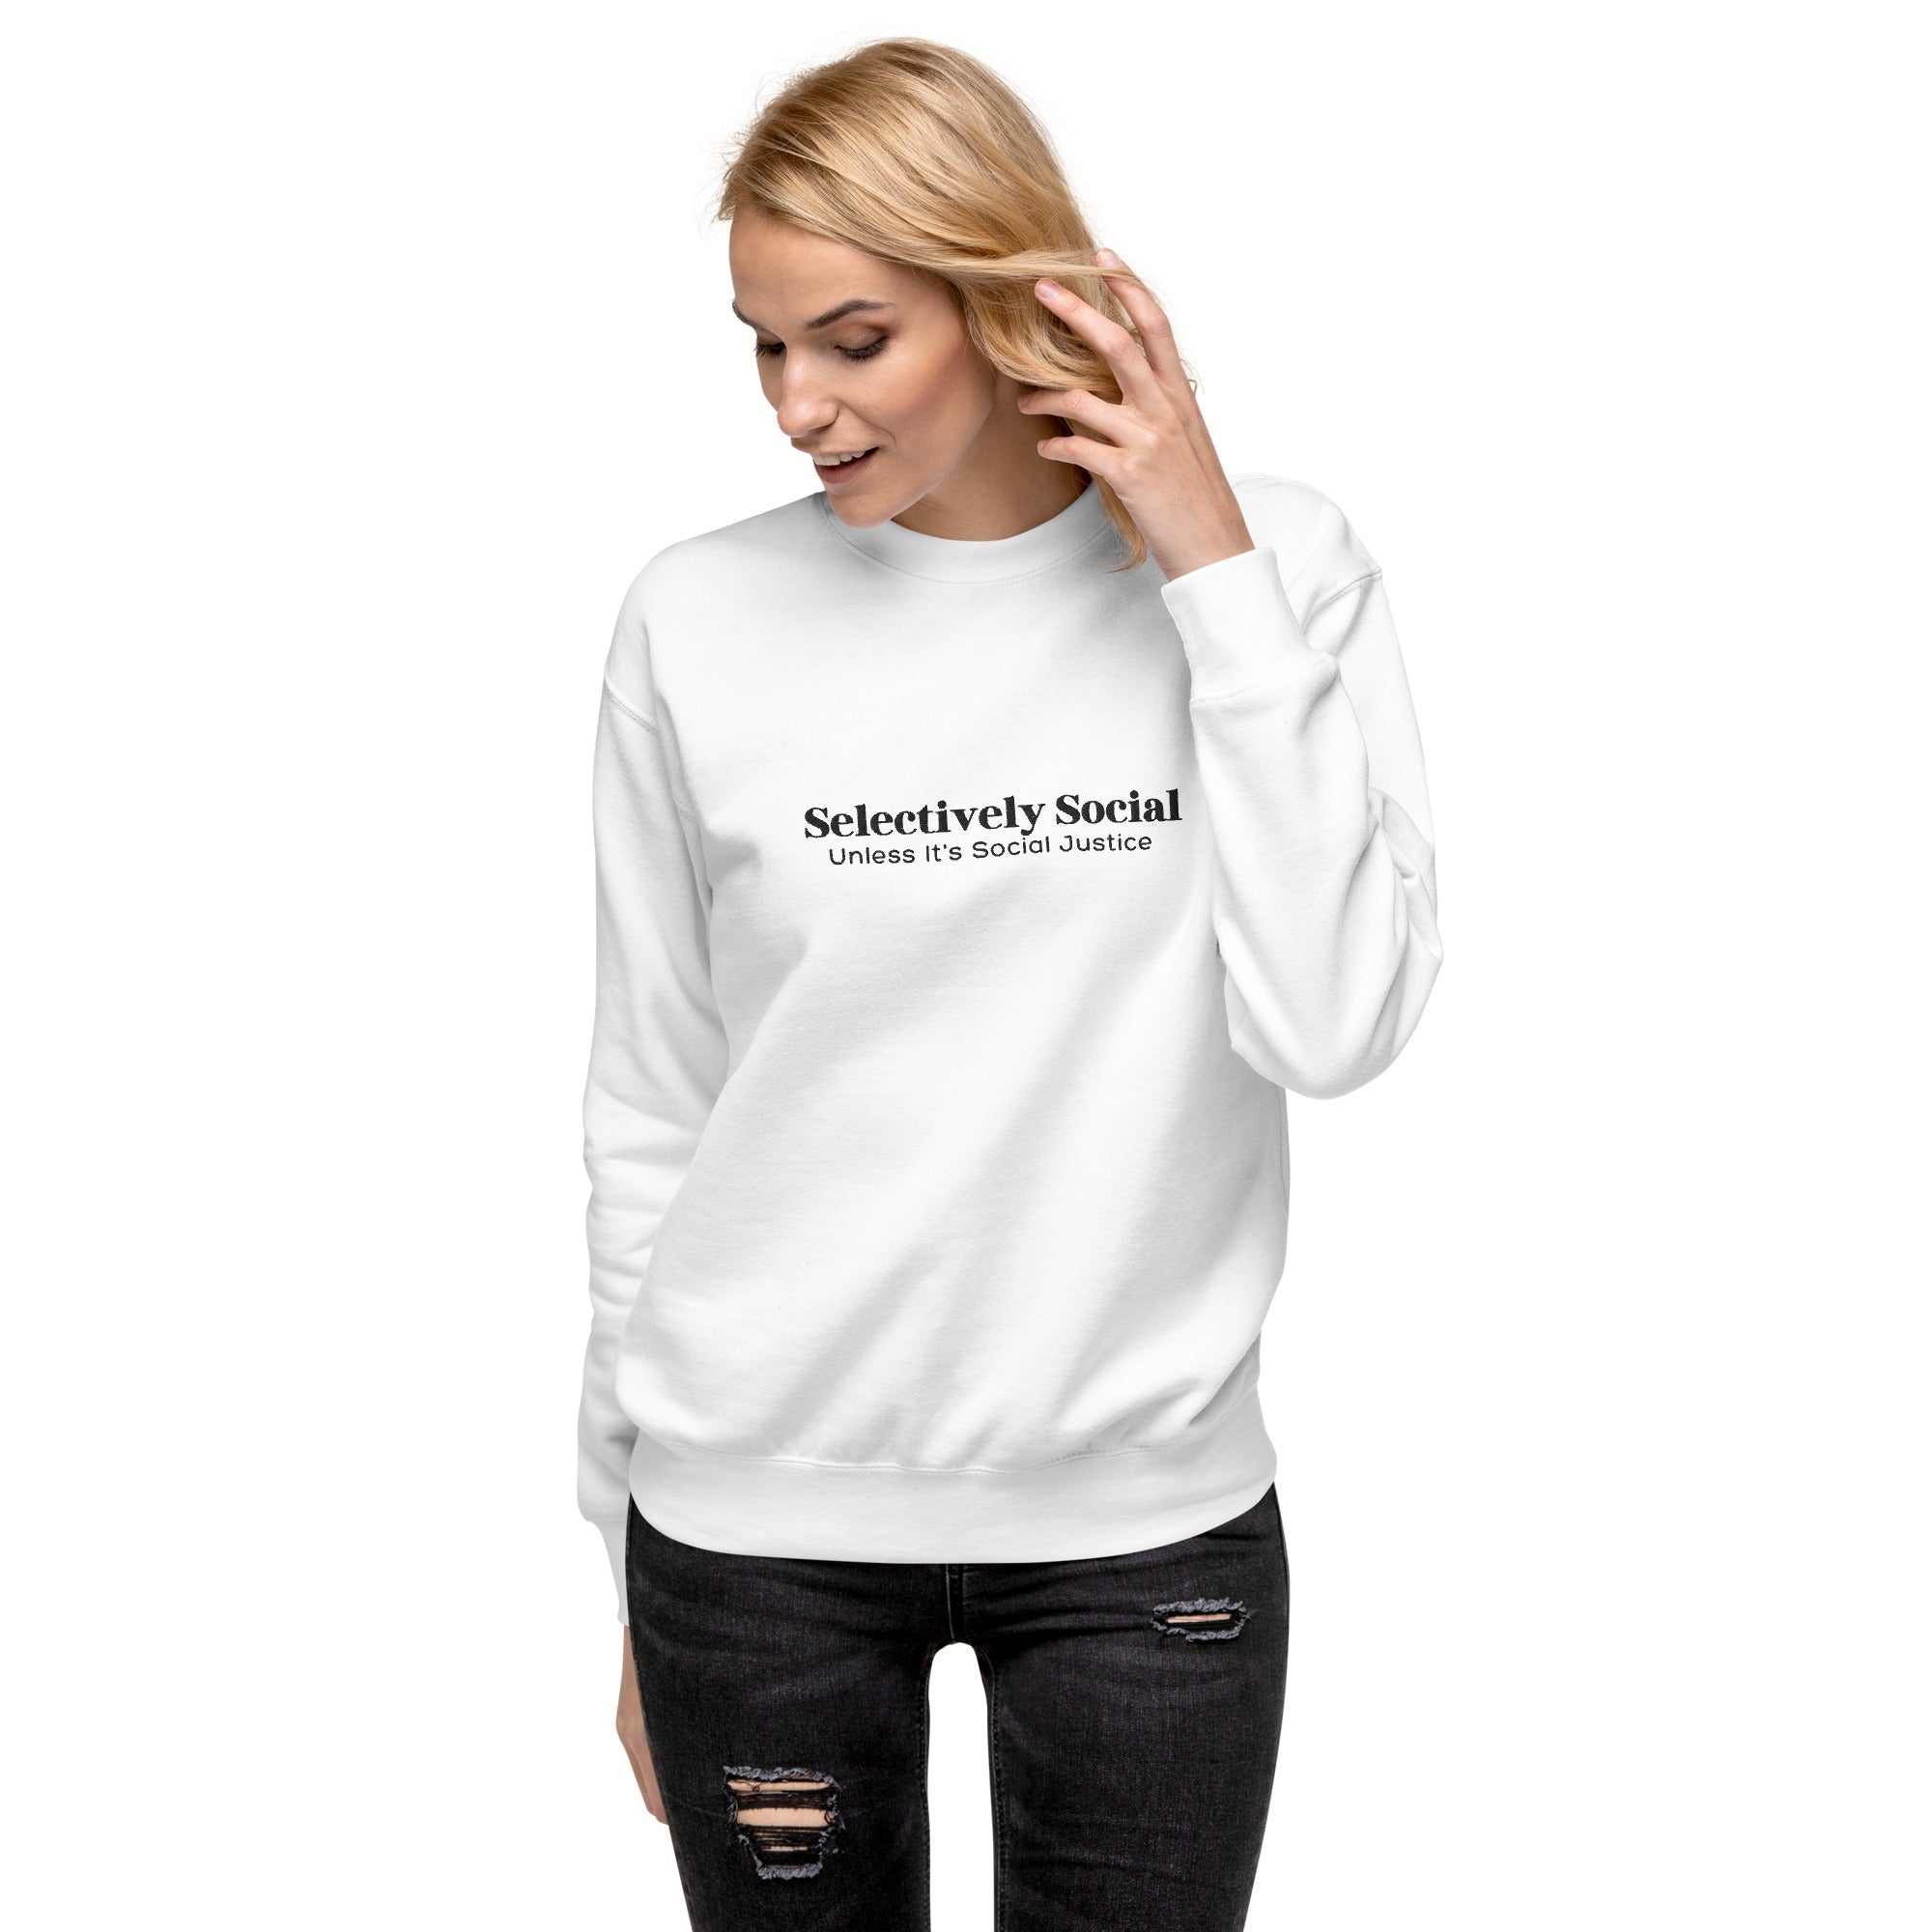 Selectively Social Black Embroidered Unisex Premium Sweatshirt - The Kindness Cause